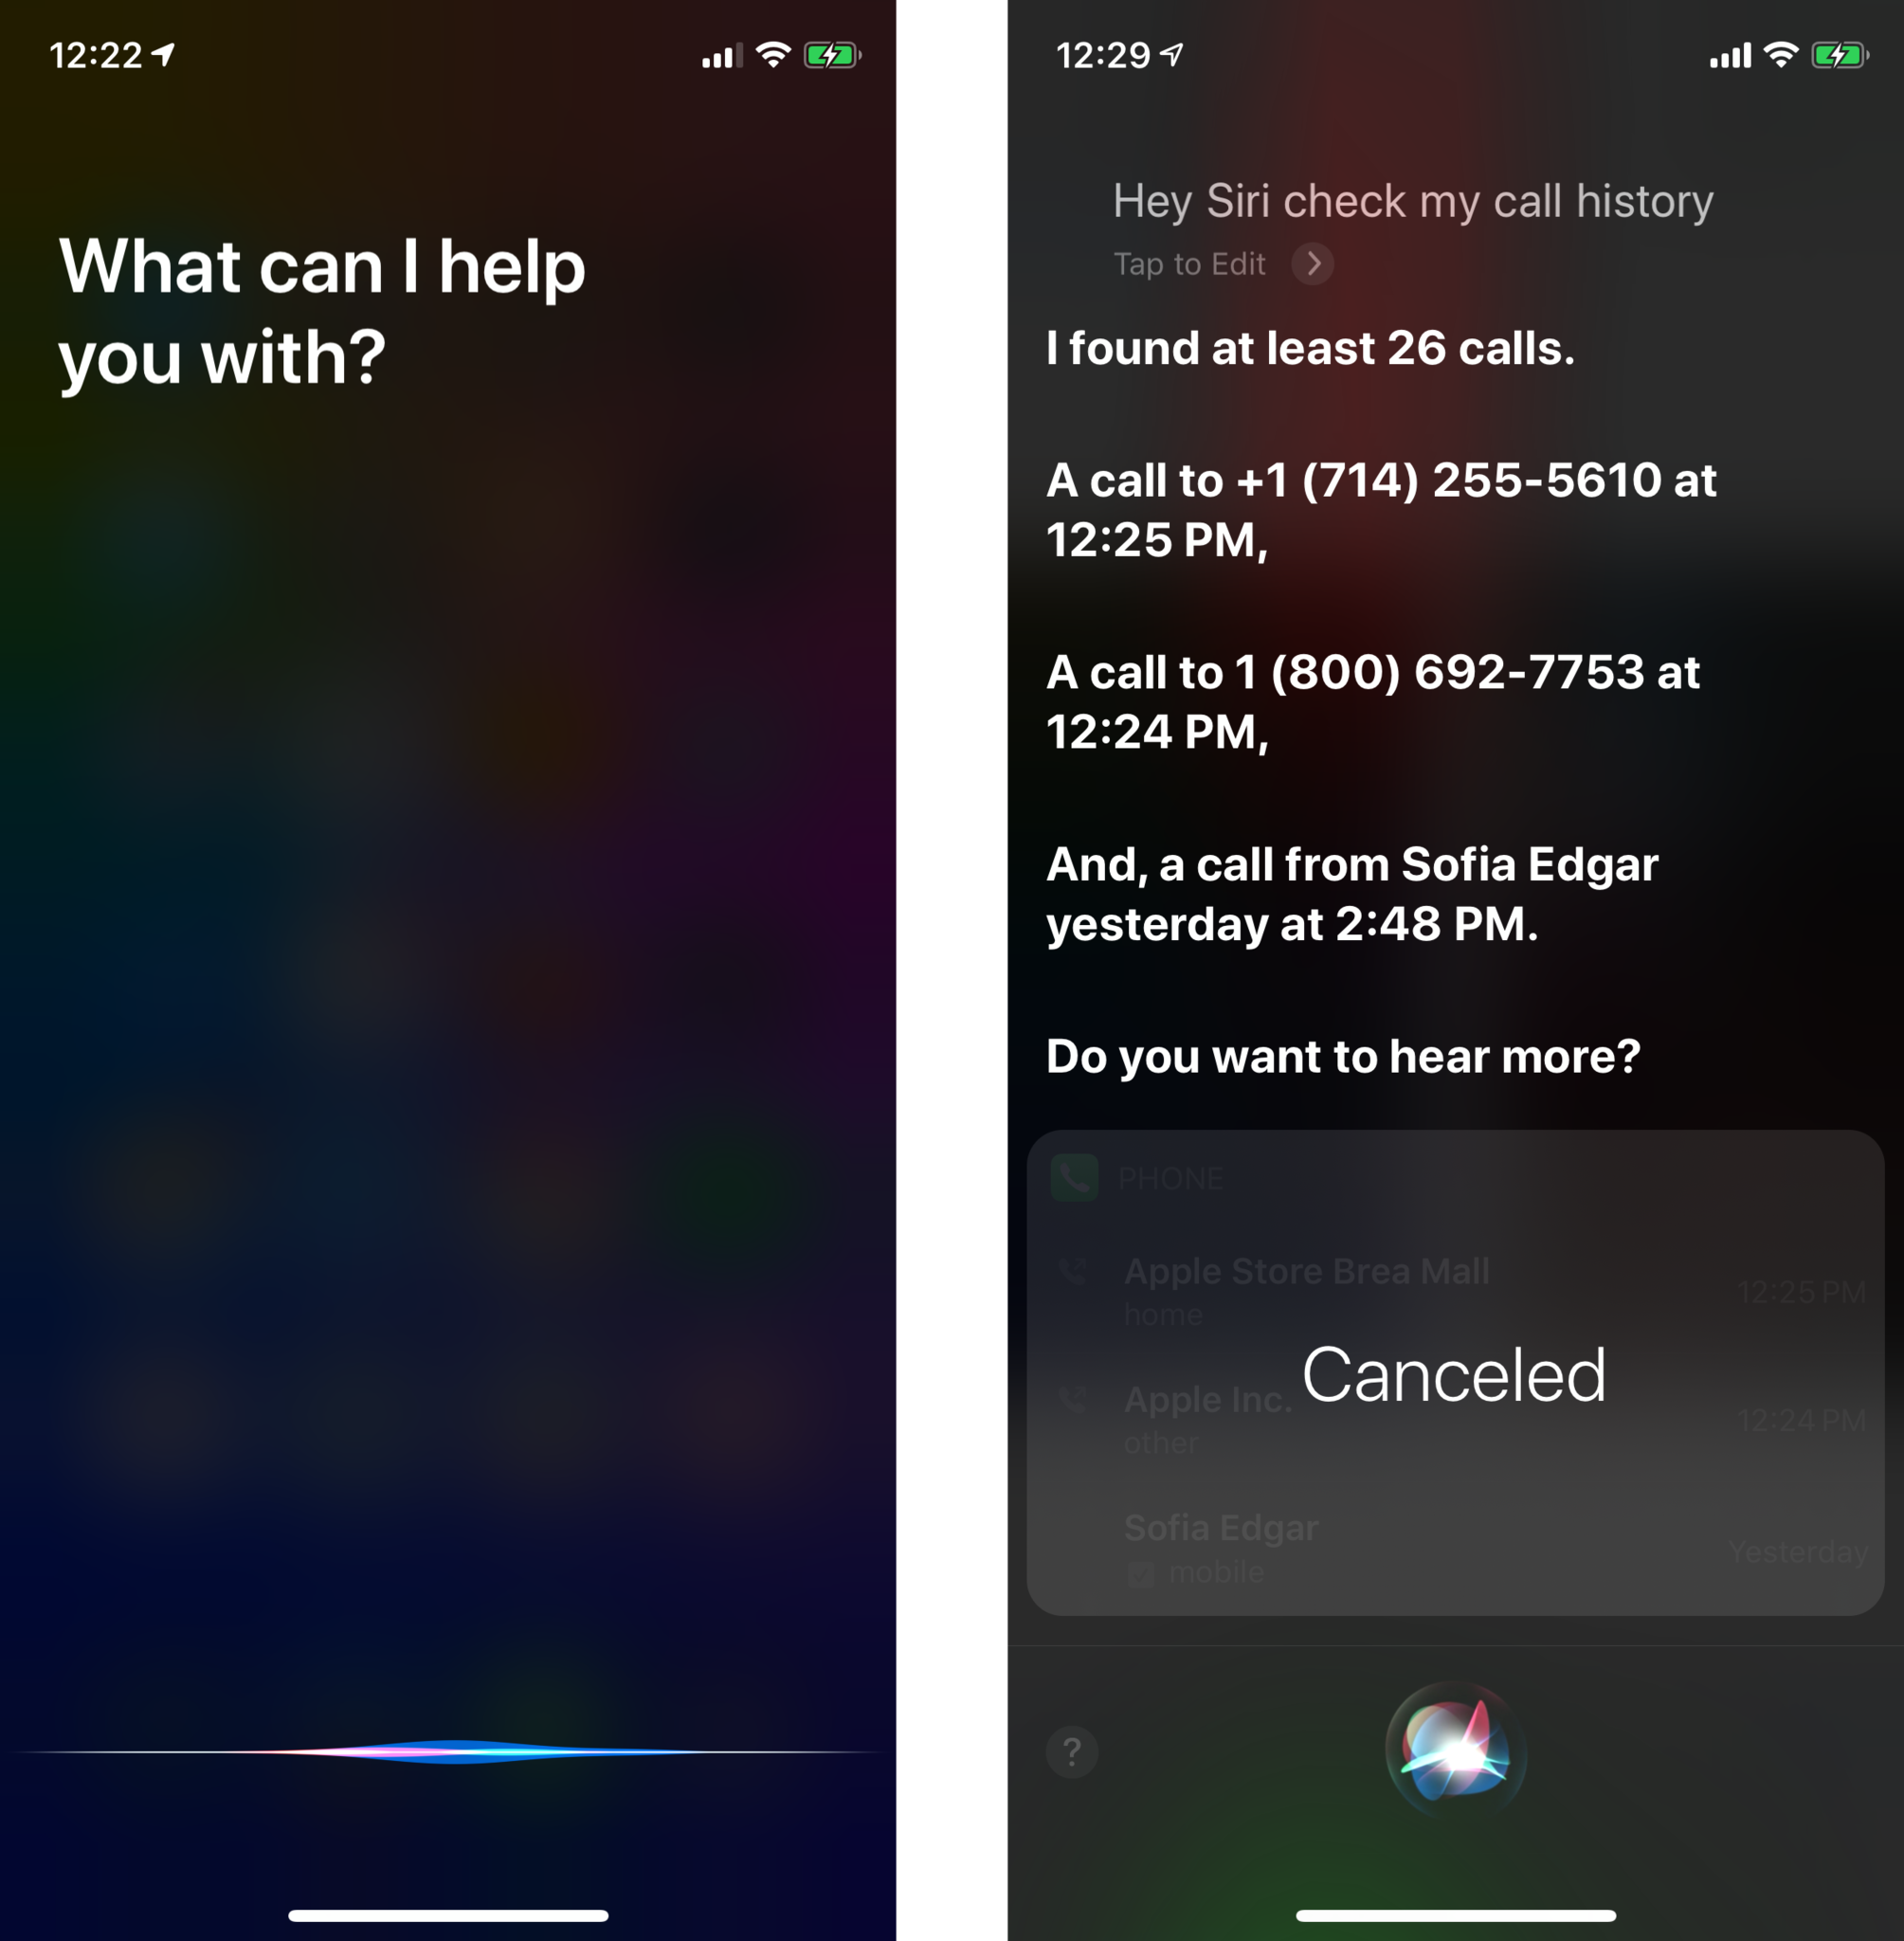 Tell Siri you want to know your call history